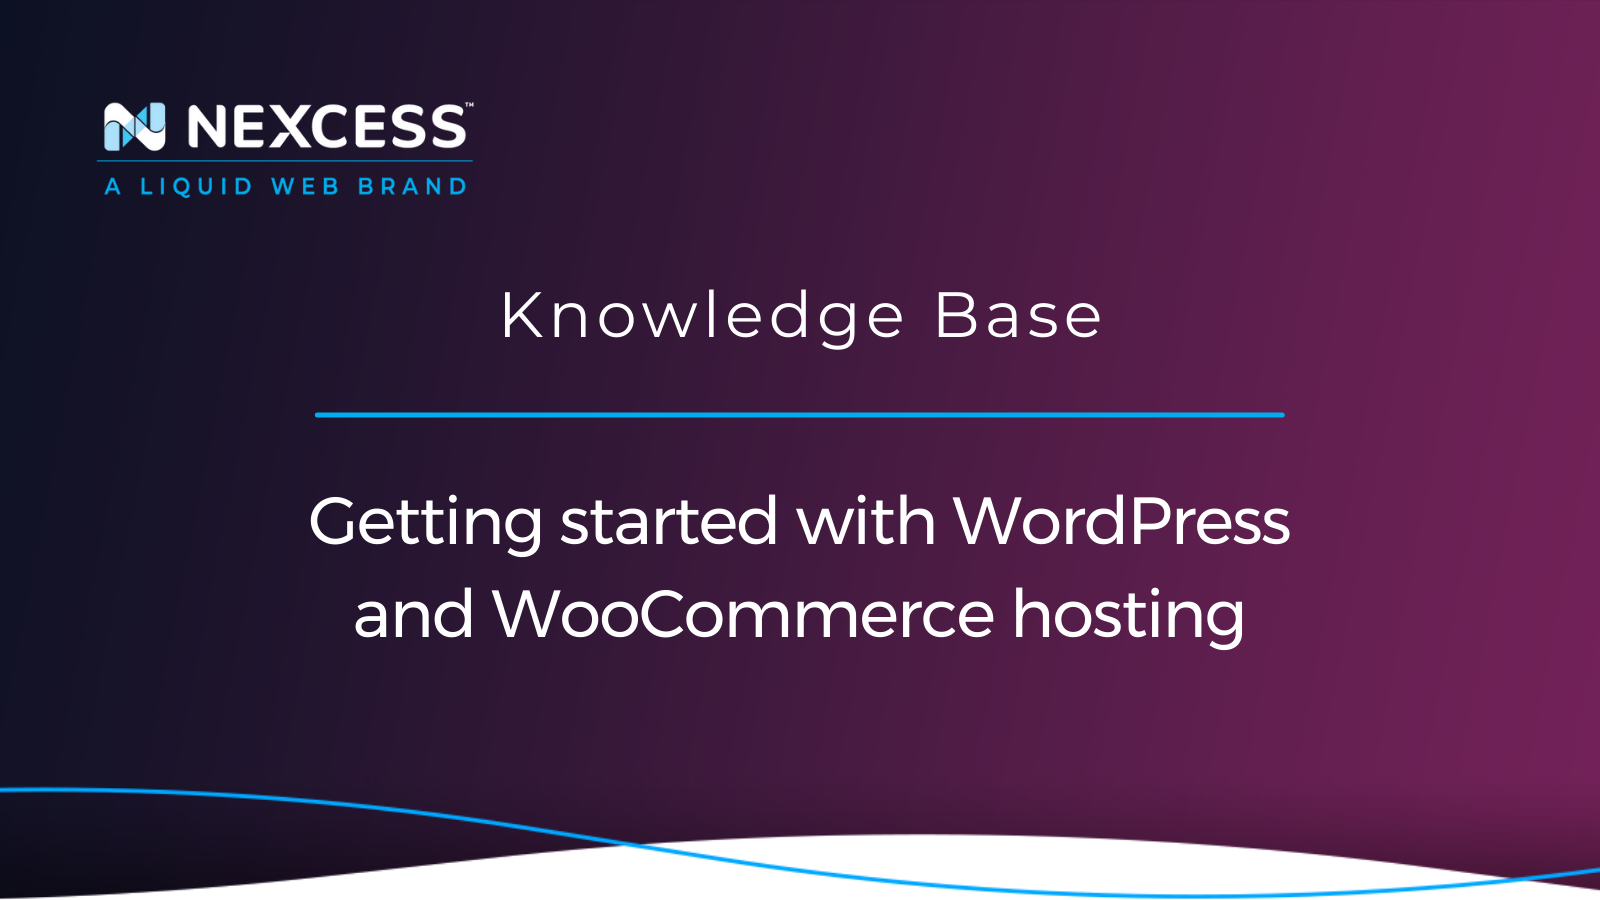 Getting started with WordPress and WooCommerce hosting